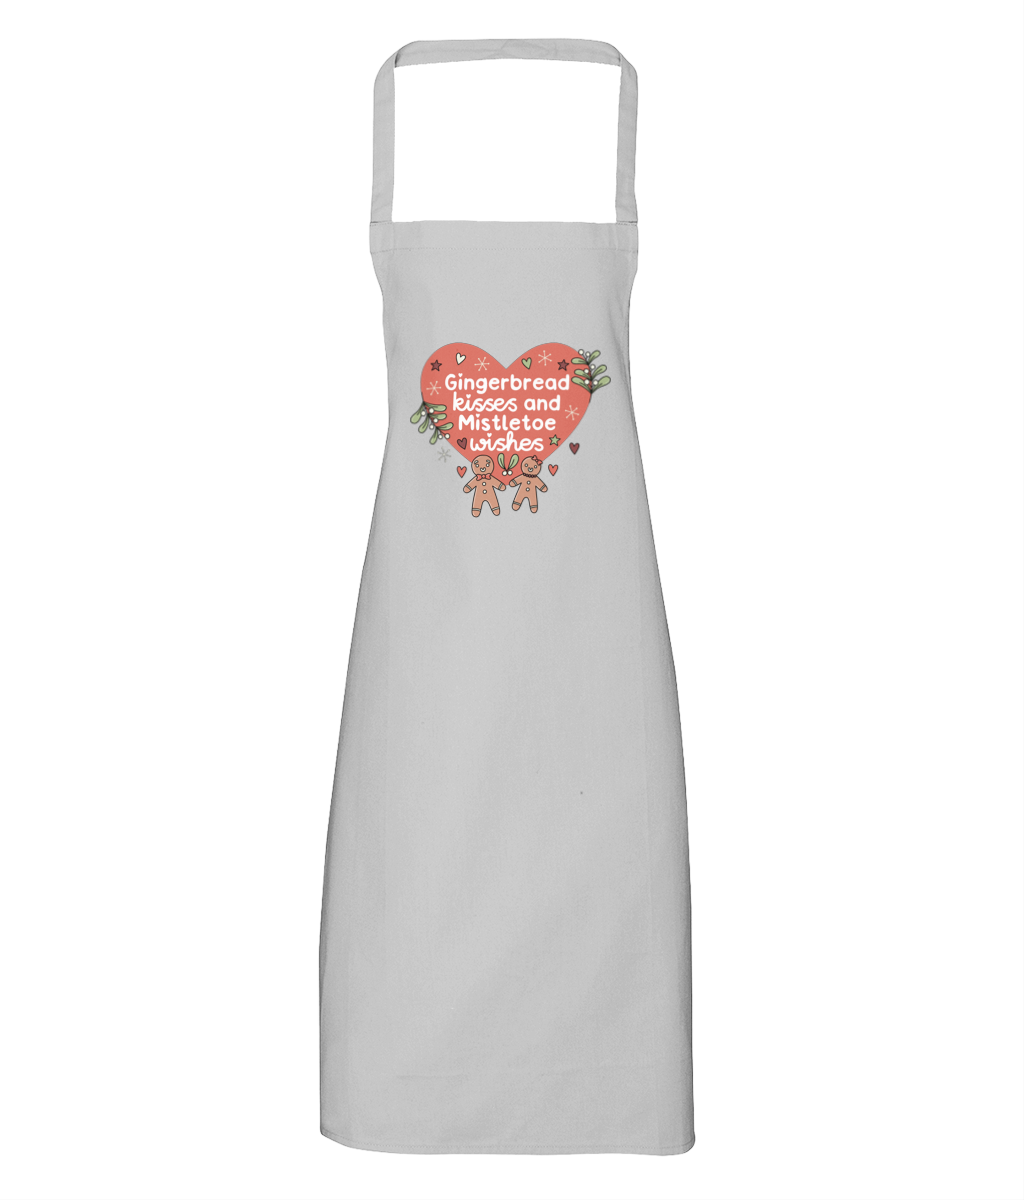 Gingerbread Kisses and Mistletoe Wishes - Apron